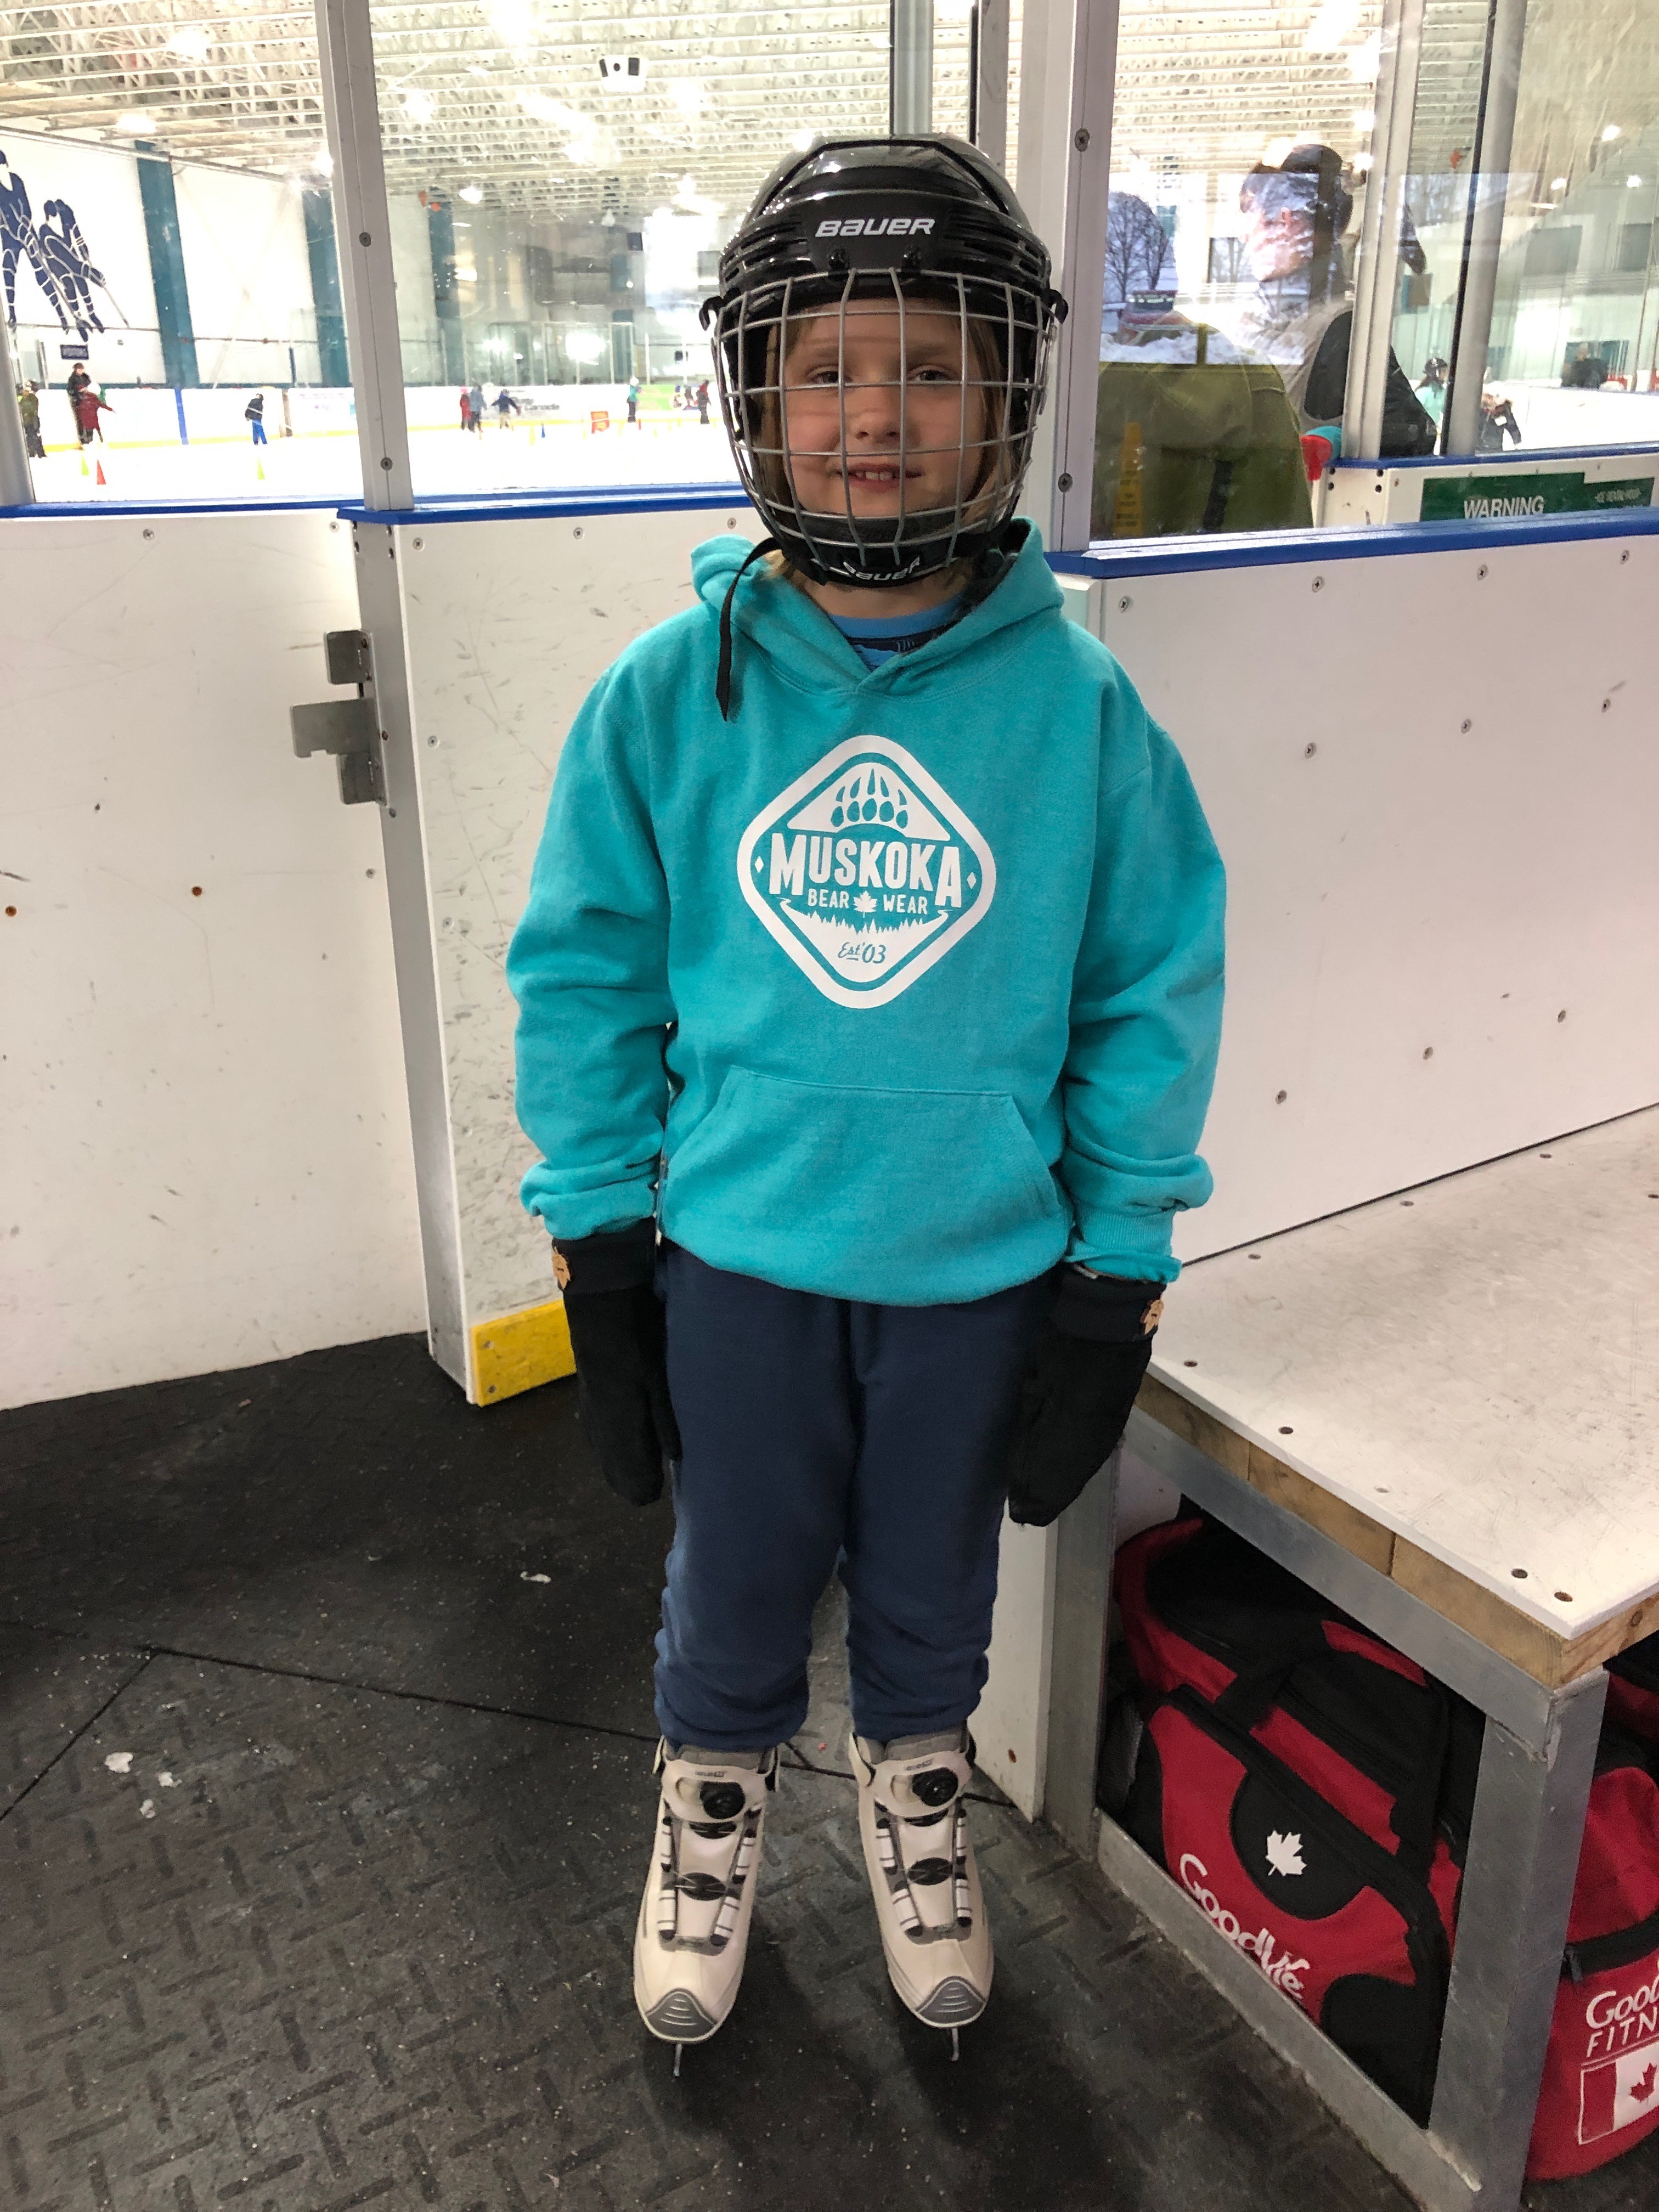 An 8 year old blonde girl stands in front of the ice in a skating rink. She is wearing skates, an aqua sweatshirt, and a hockey helmet with a wire face mask. 